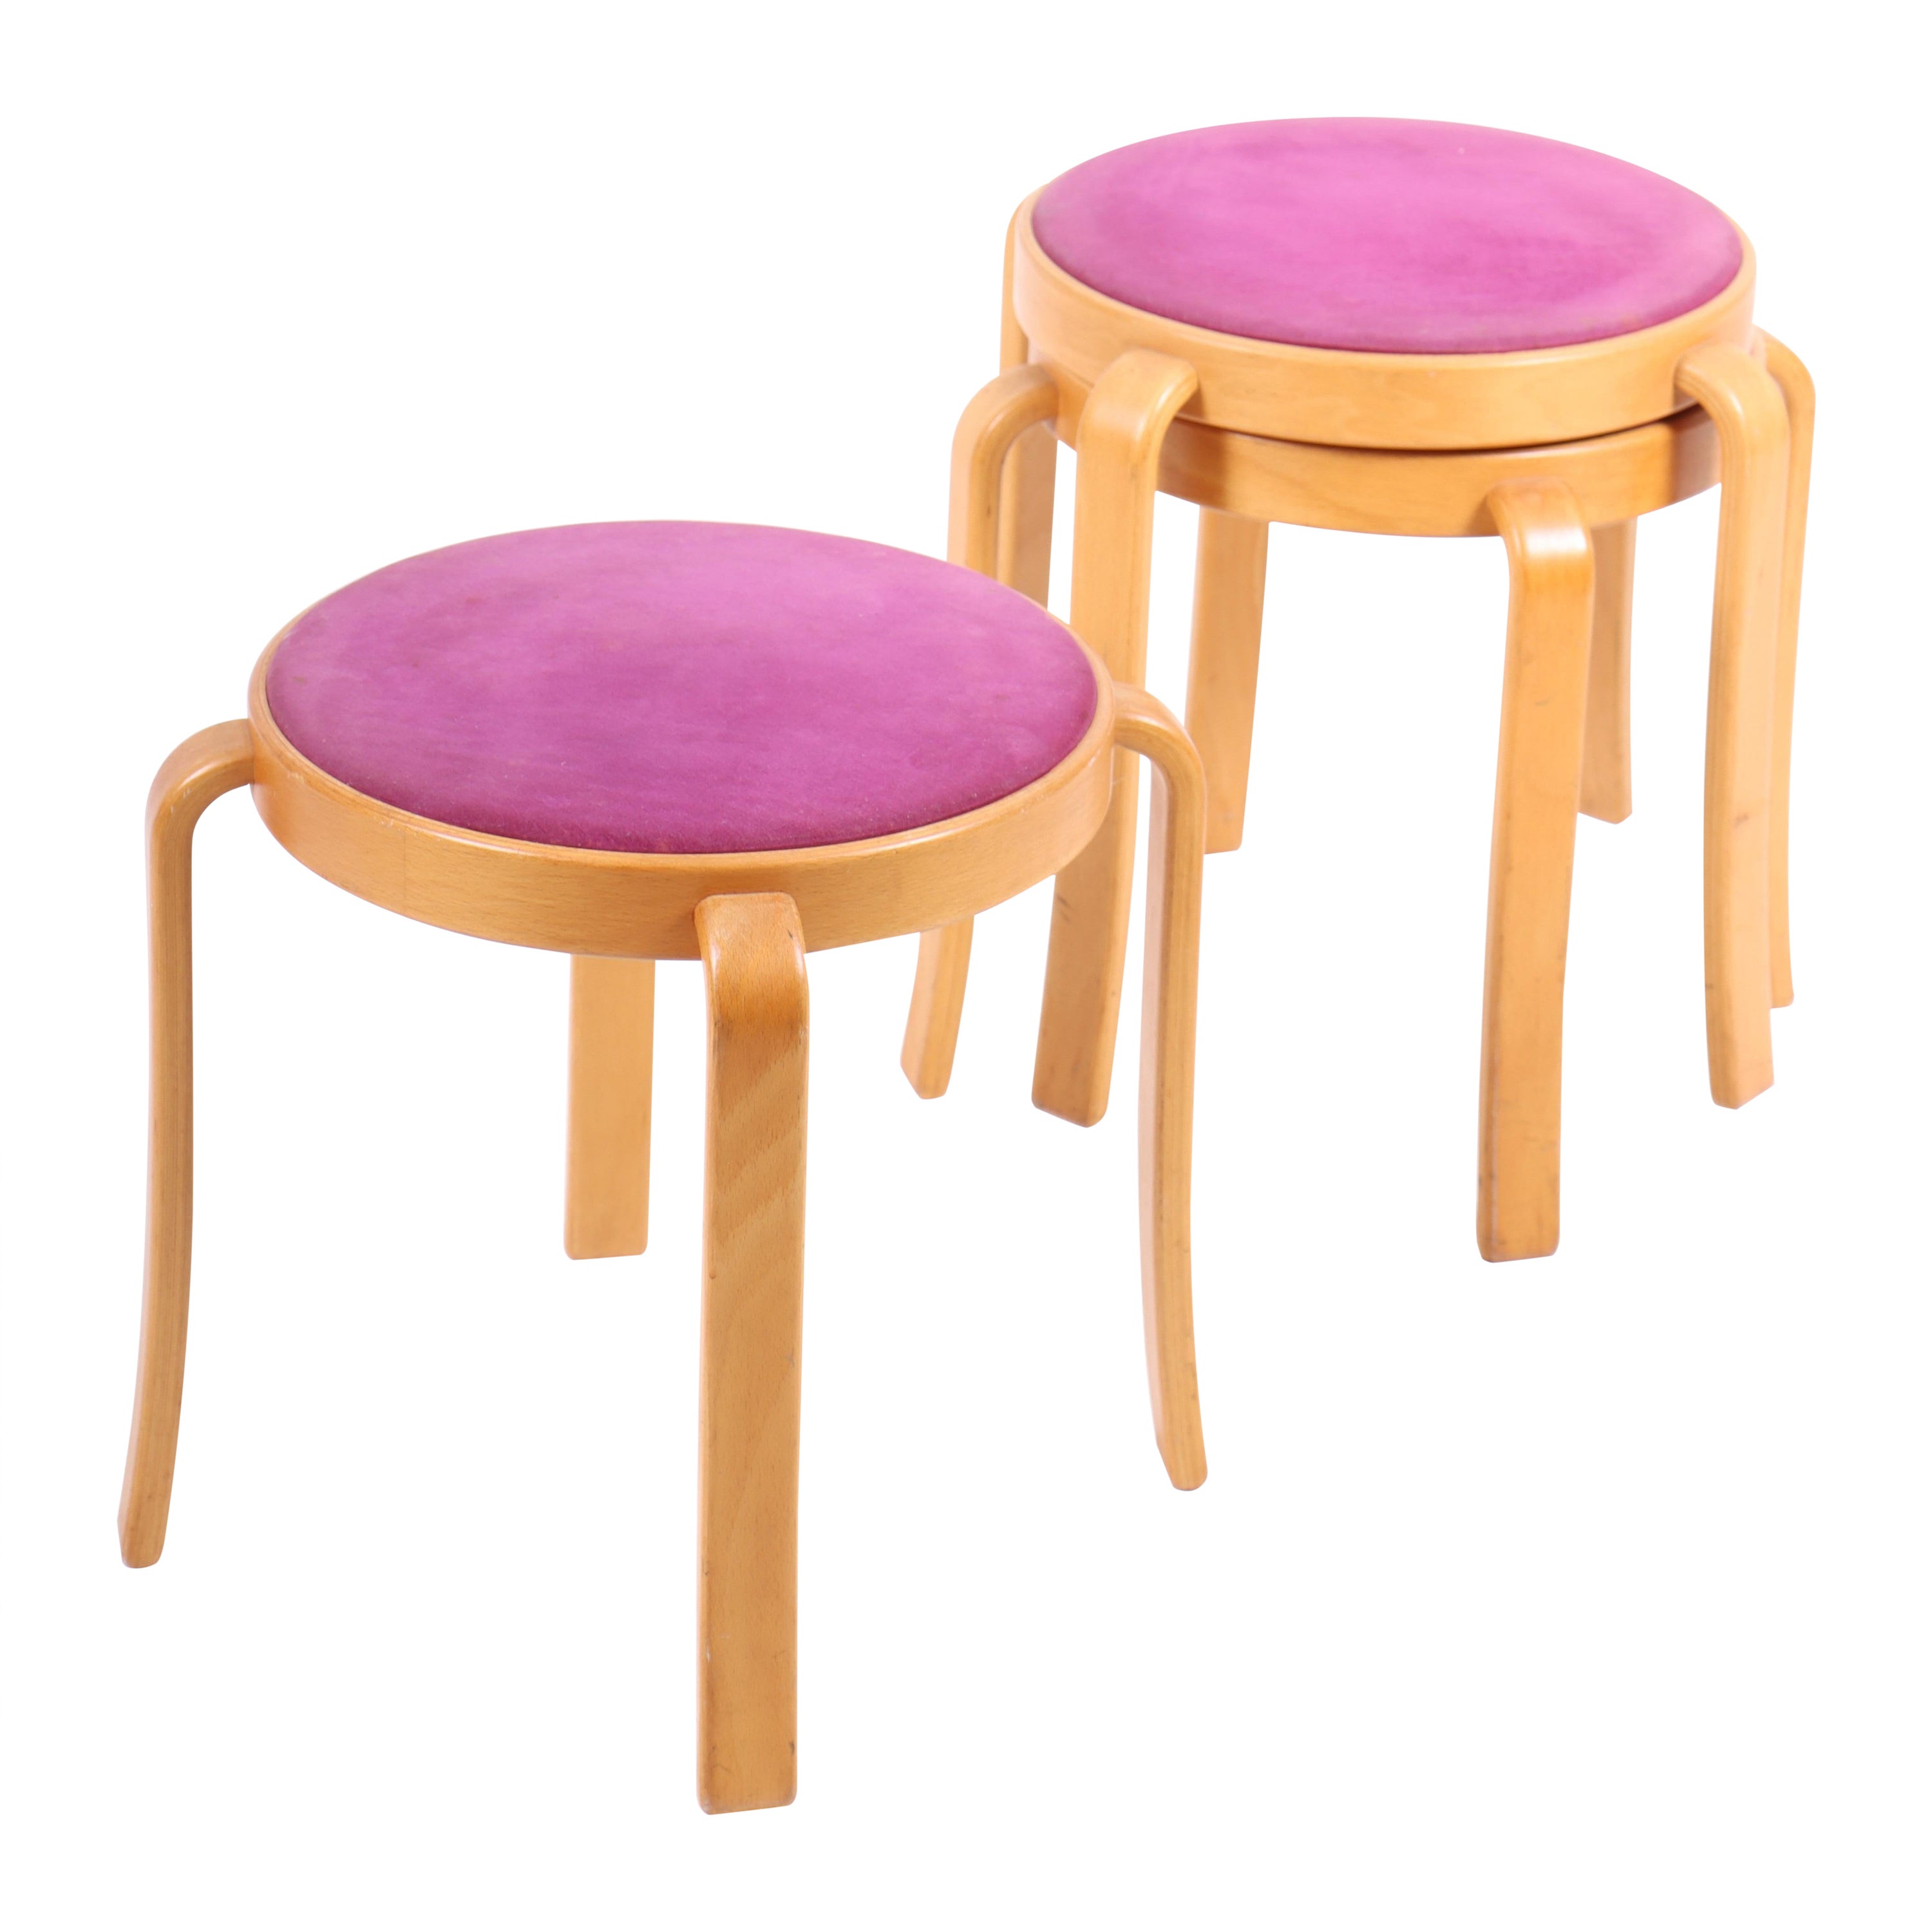 Set of Three Stools, Designed by Rud Thygesen, 1980 For Sale